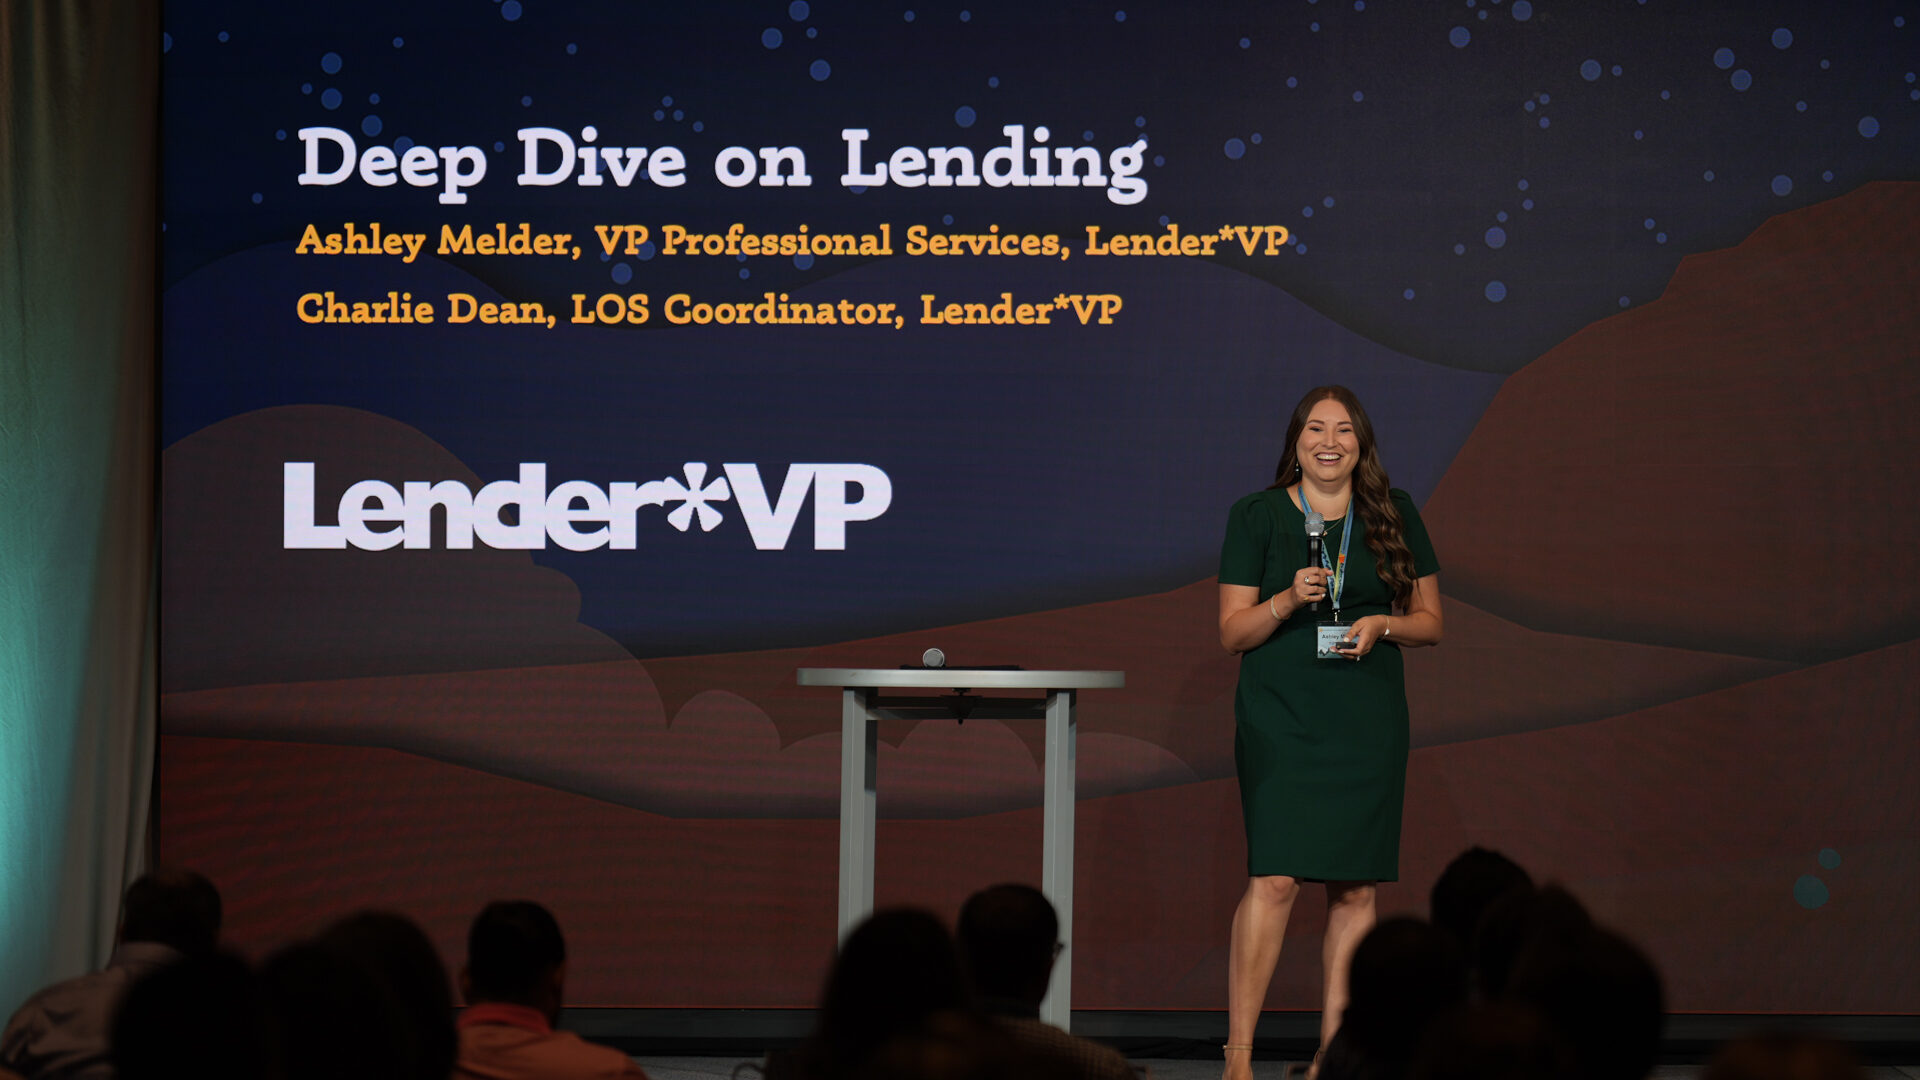 VP Ashley Melder comes on stage to discuss developments in lending.